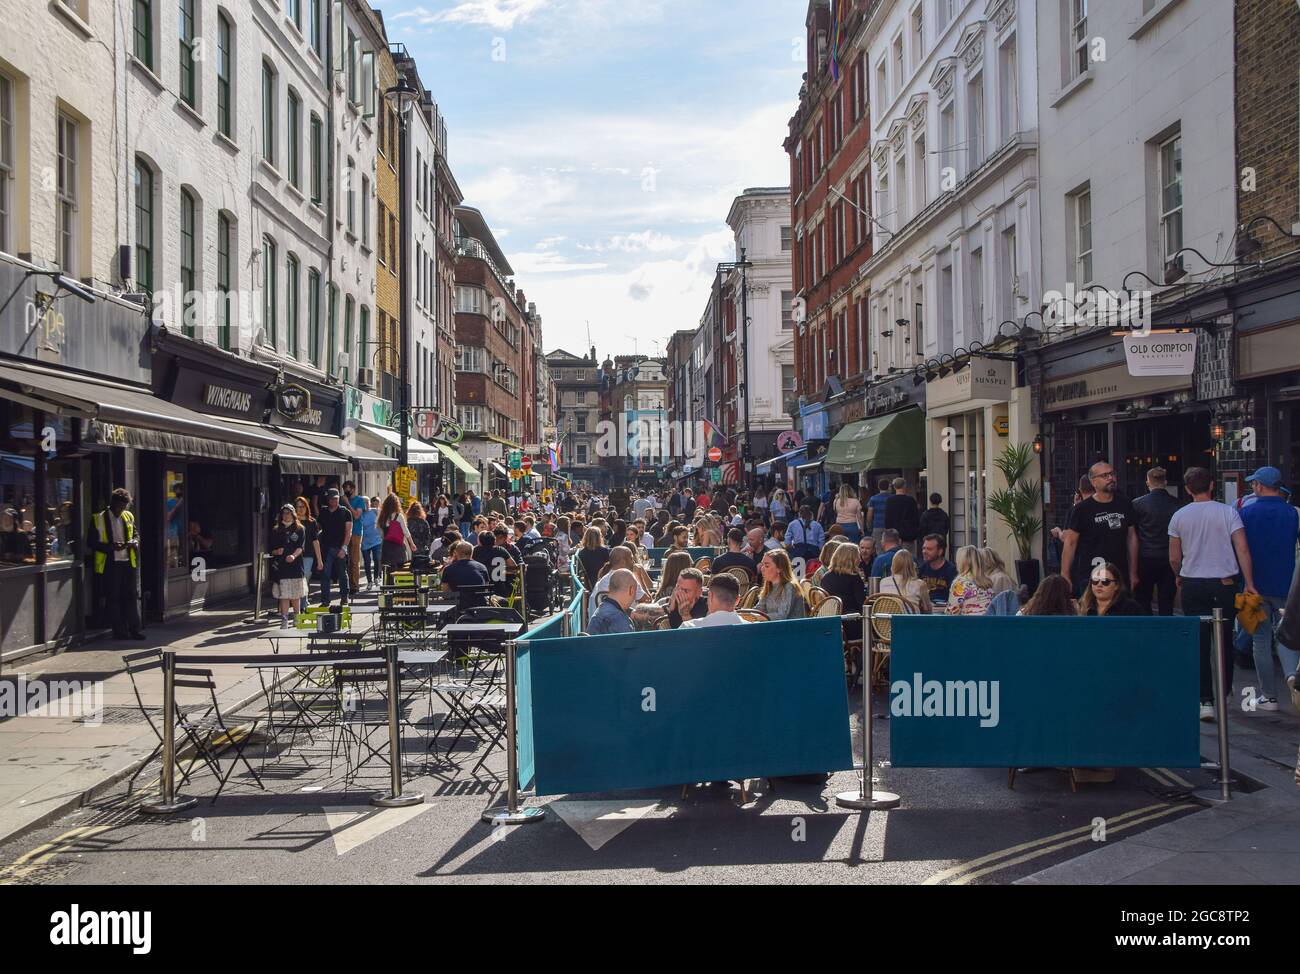 London, United Kingdom. 7th August 2021. Busy Old Compton Street. People flocked to bars and restaurants in Soho to enjoy the sunshine after a morning of heavy rain showers . (Credit: Vuk Valcic / Alamy Live News) Stock Photo